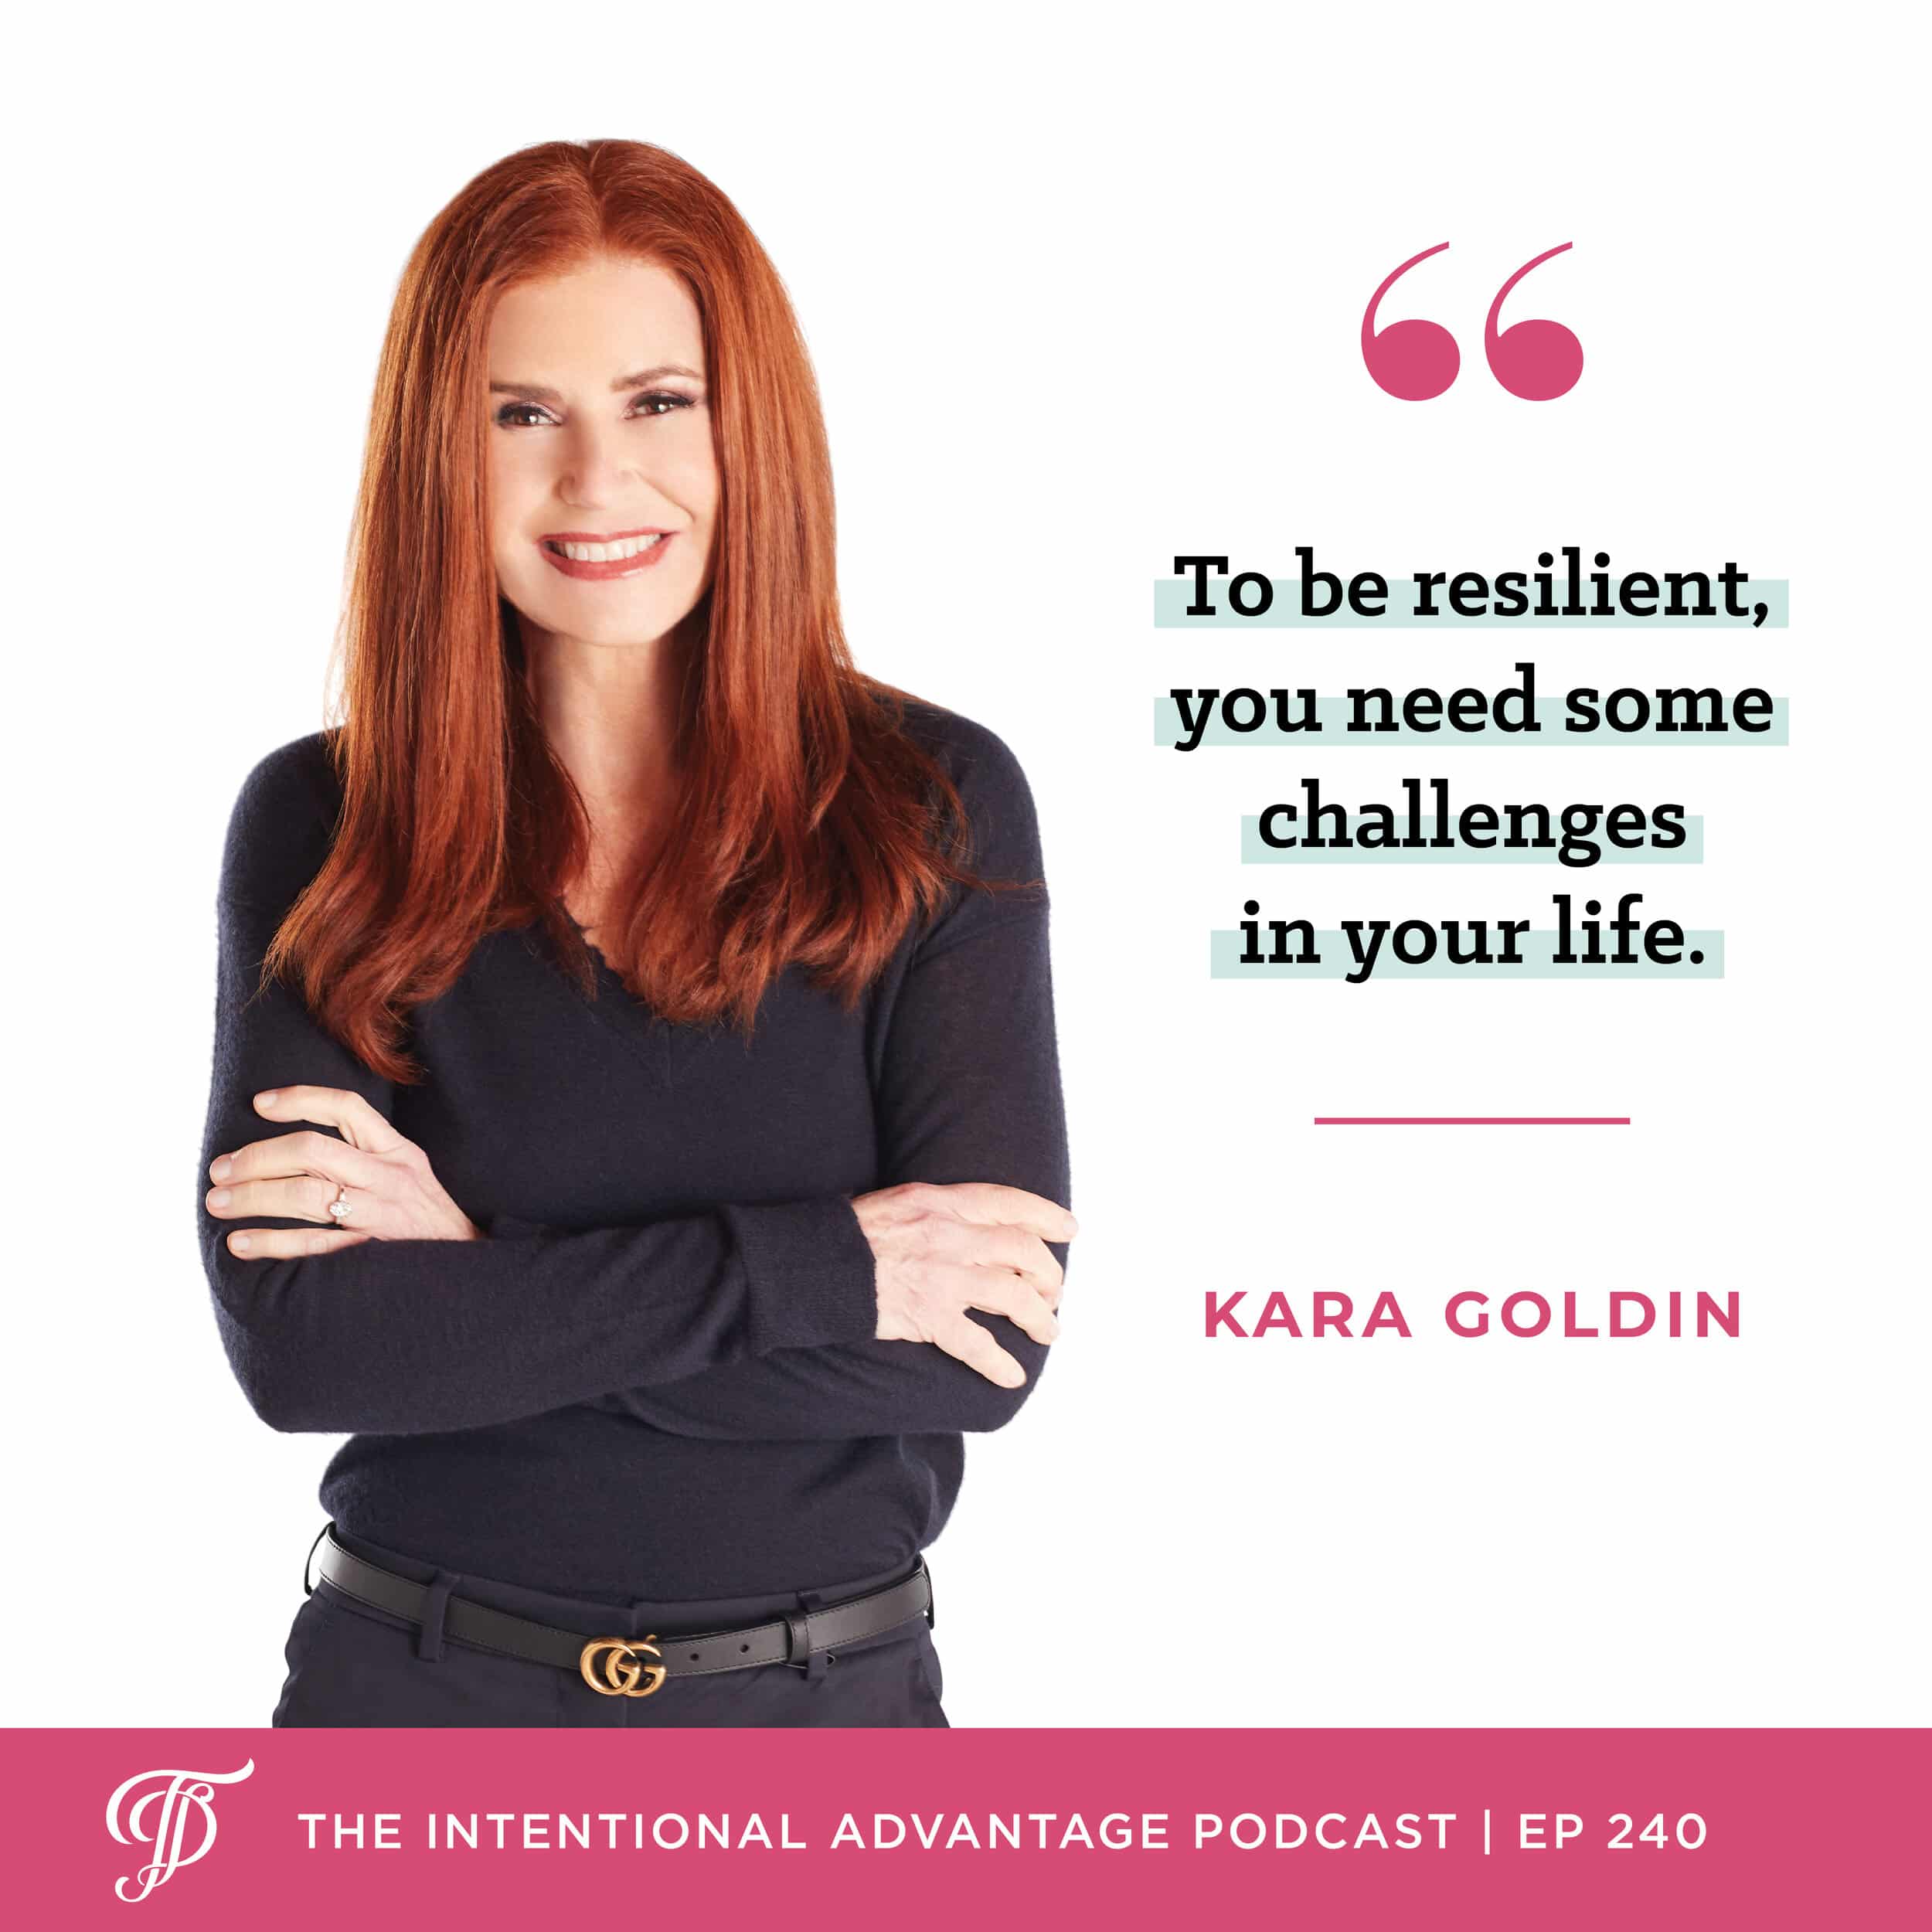 Kara Goldin quote from her podcast interview on The Intentional Advantage